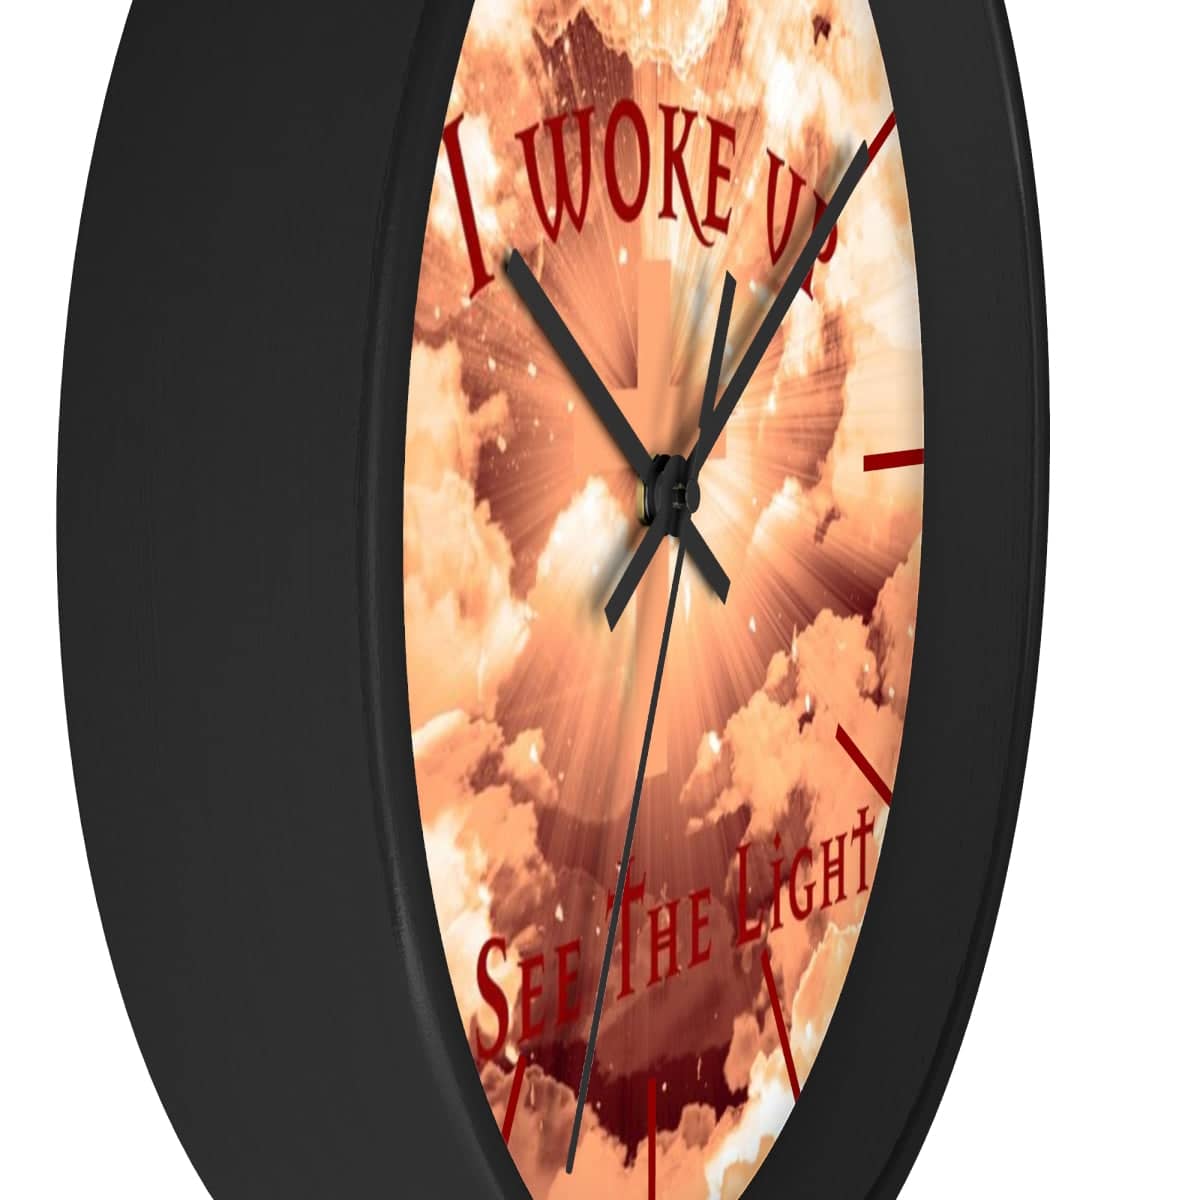 Wall Clock &quot;I Woke Up to See the Light&quot;